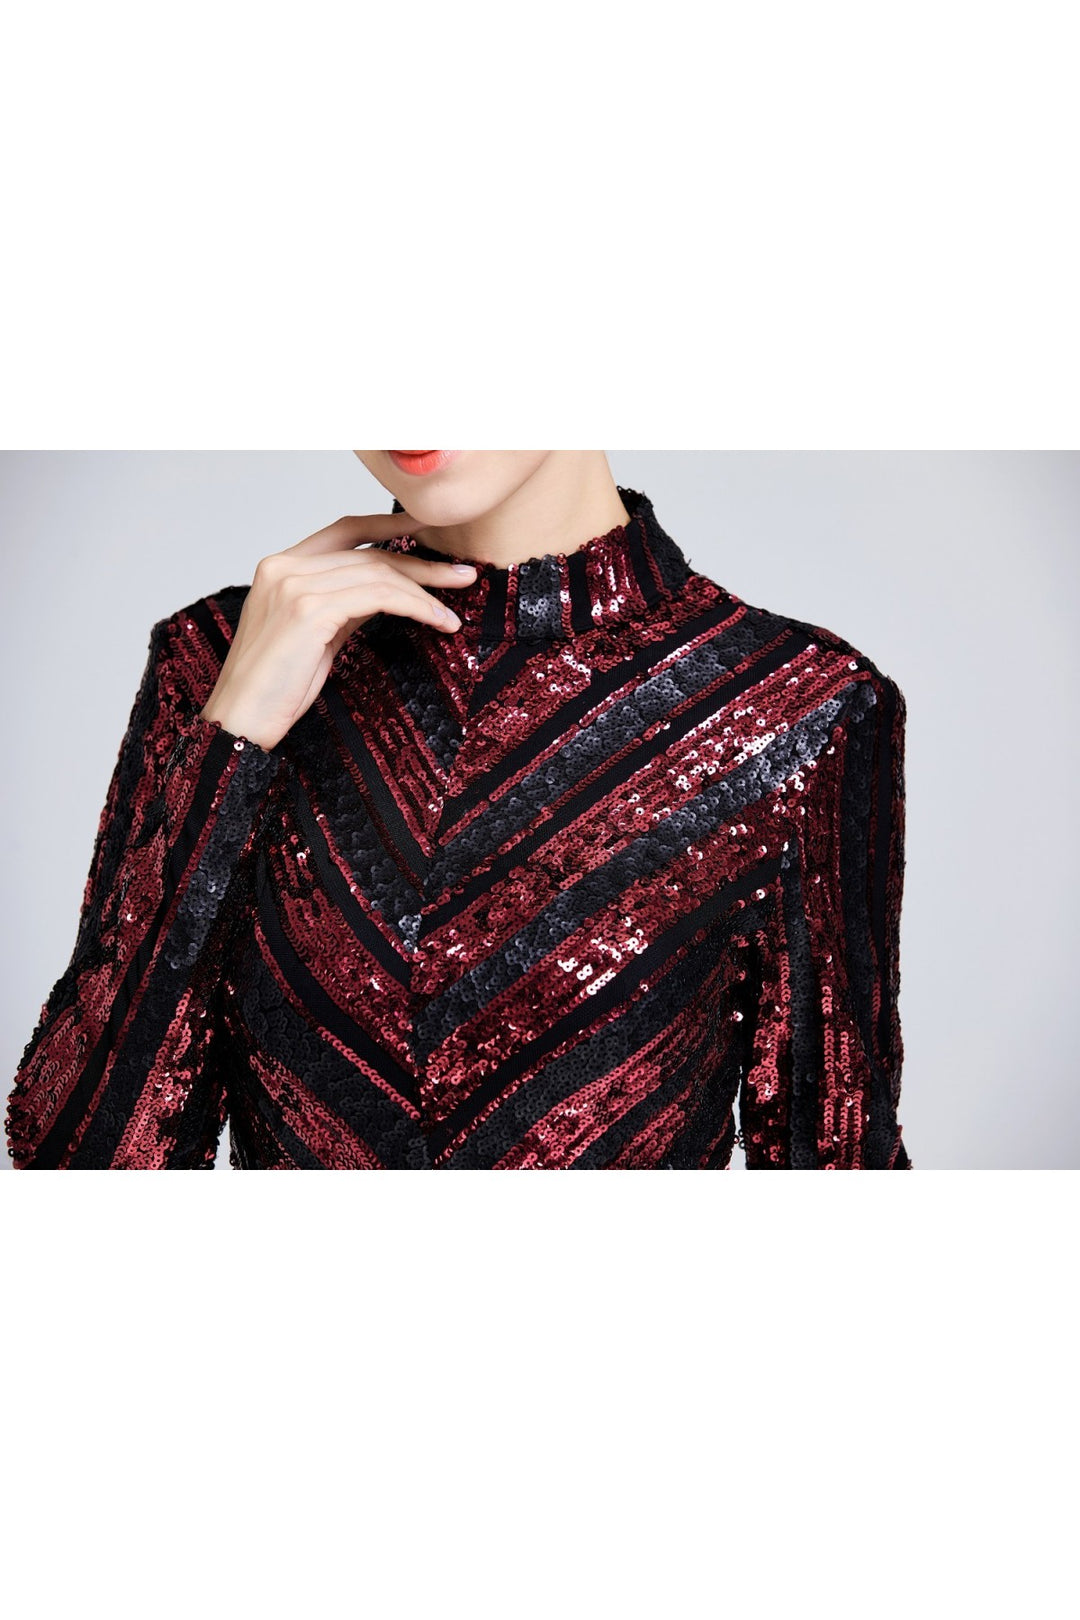 Black & Red Two-tone Mini Bodycon Sequin Dress - Close Up View